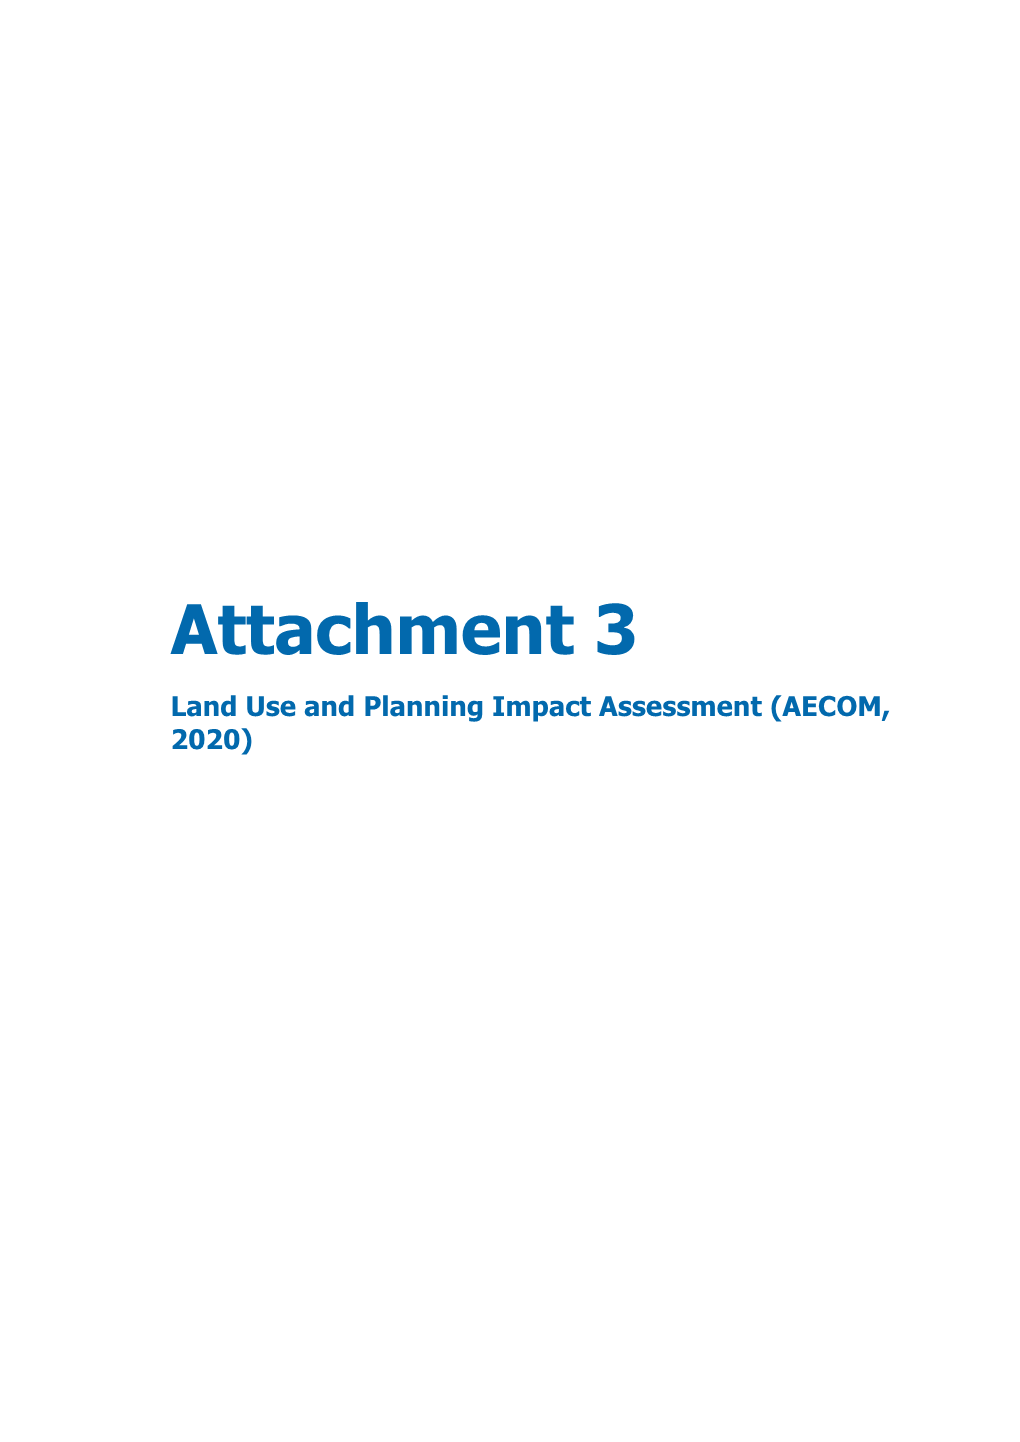 Land Use and Planning Impact Assessment (AECOM, 2020)